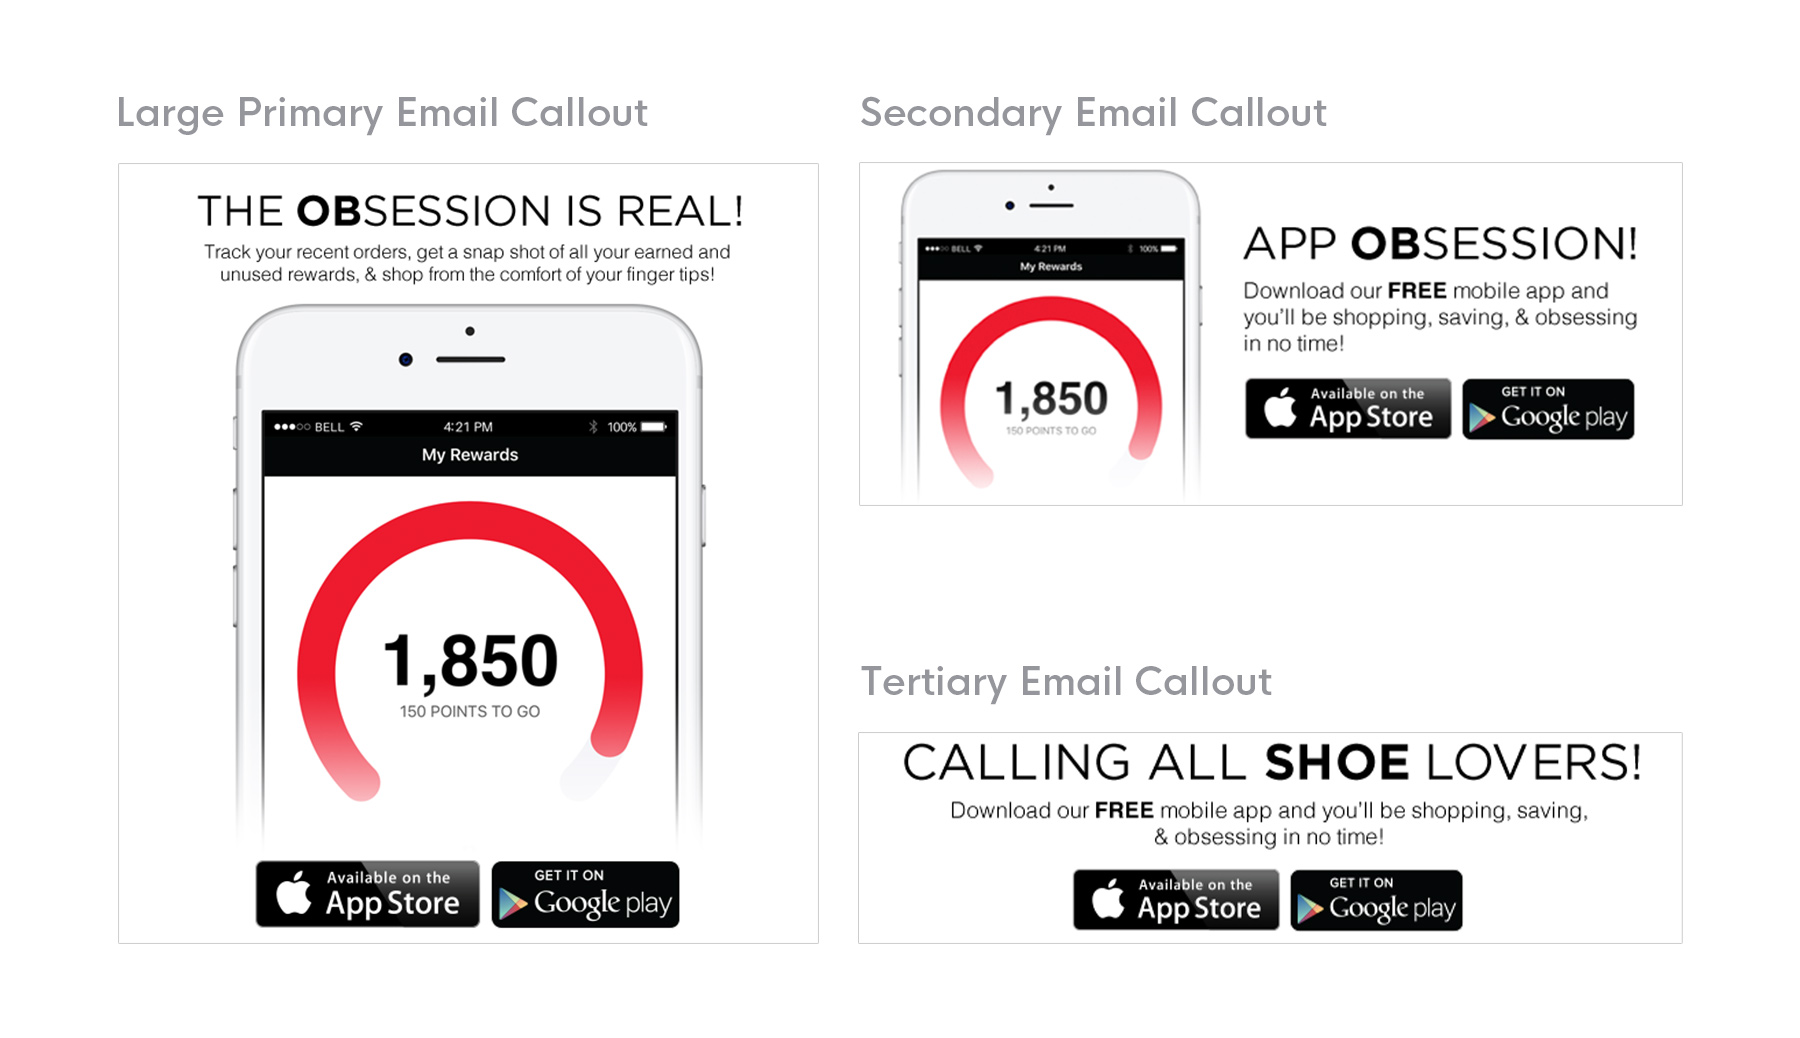 one image showcasing 3 different email call-to-actions specifically designed to market the mobile app